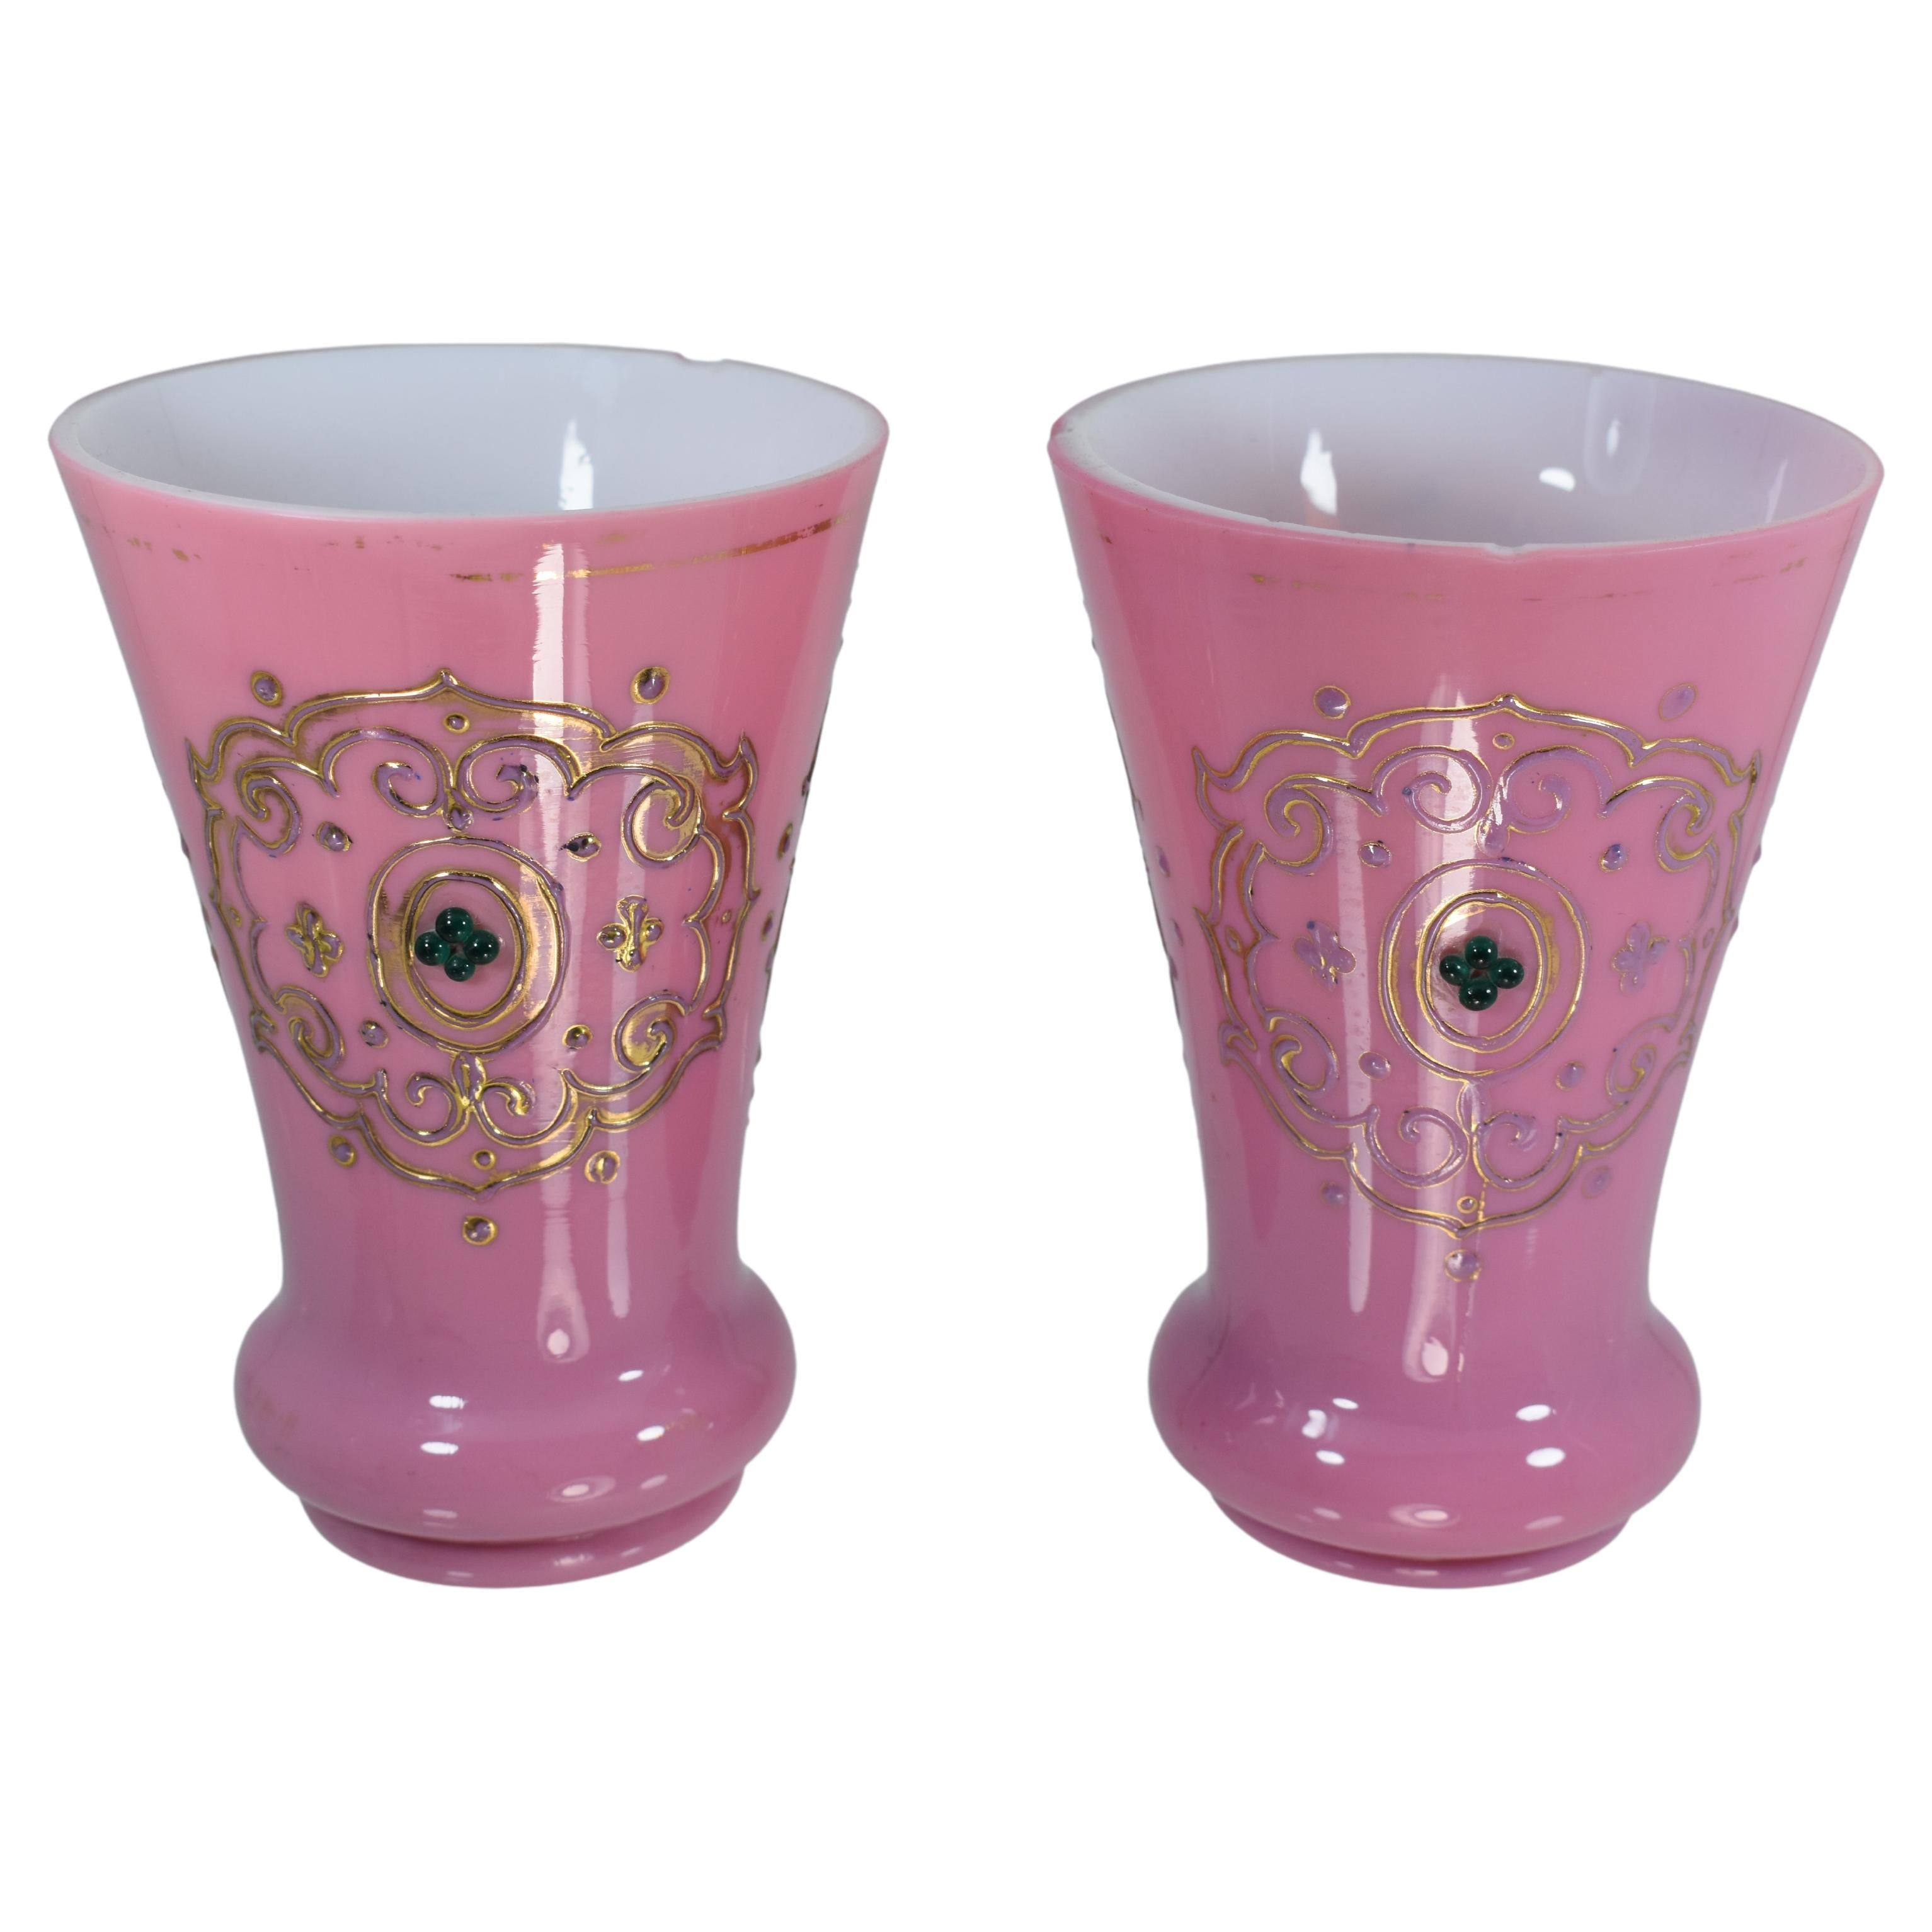 Pair of overlaid opaline glass cups
Beautiful pink color and a milkly white inner layer
Rich gilding and enamel decoration
Made in 19th Century for the Ottoman market
13 cm high